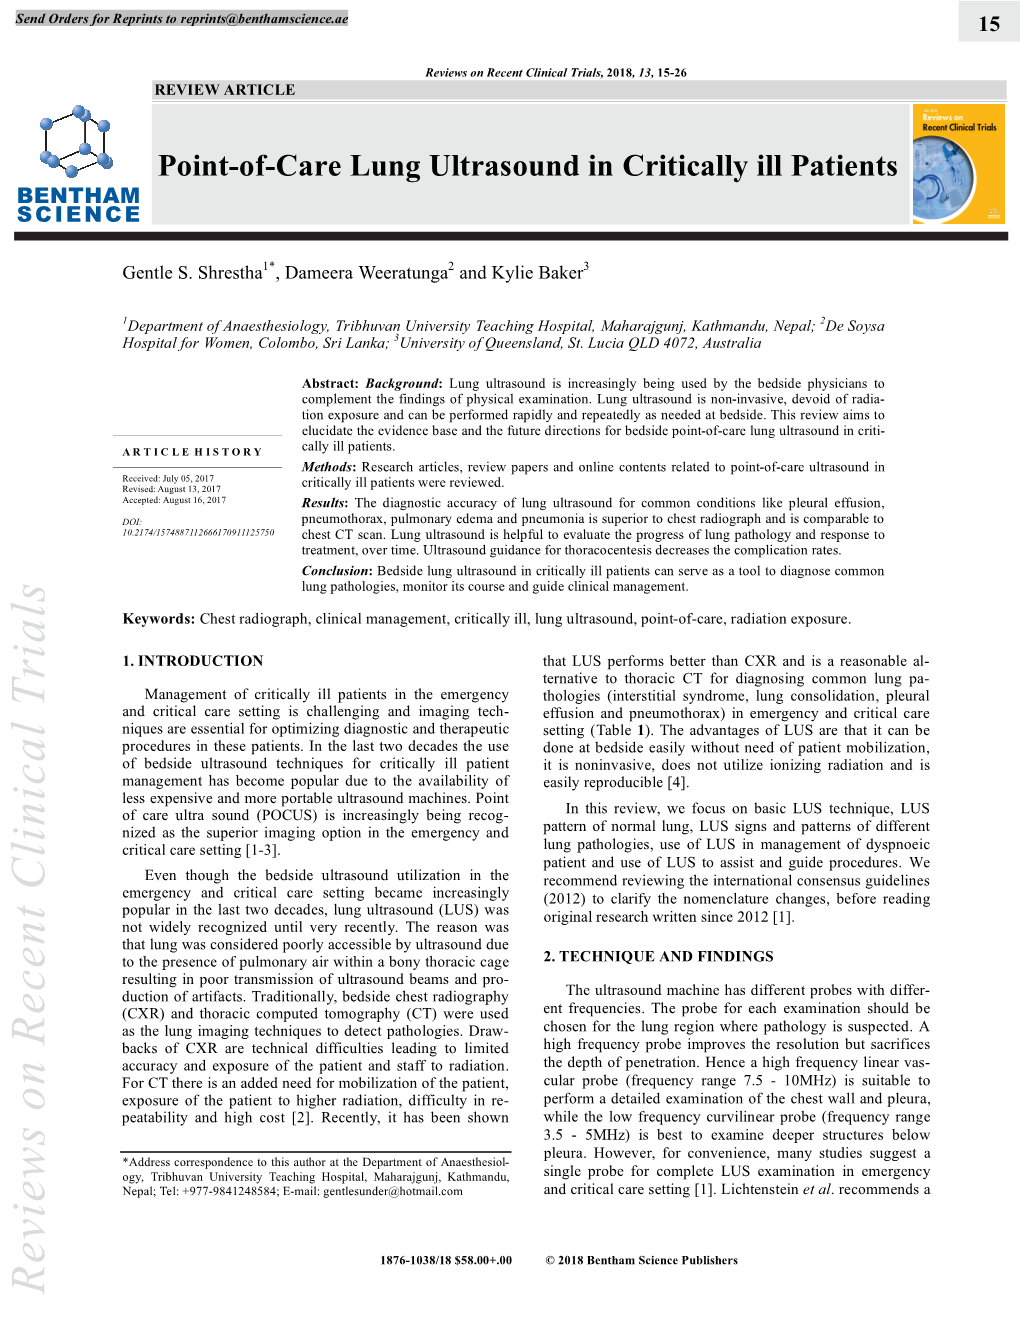 Point-Of-Care Lung Ultrasound in Critically Ill Patients